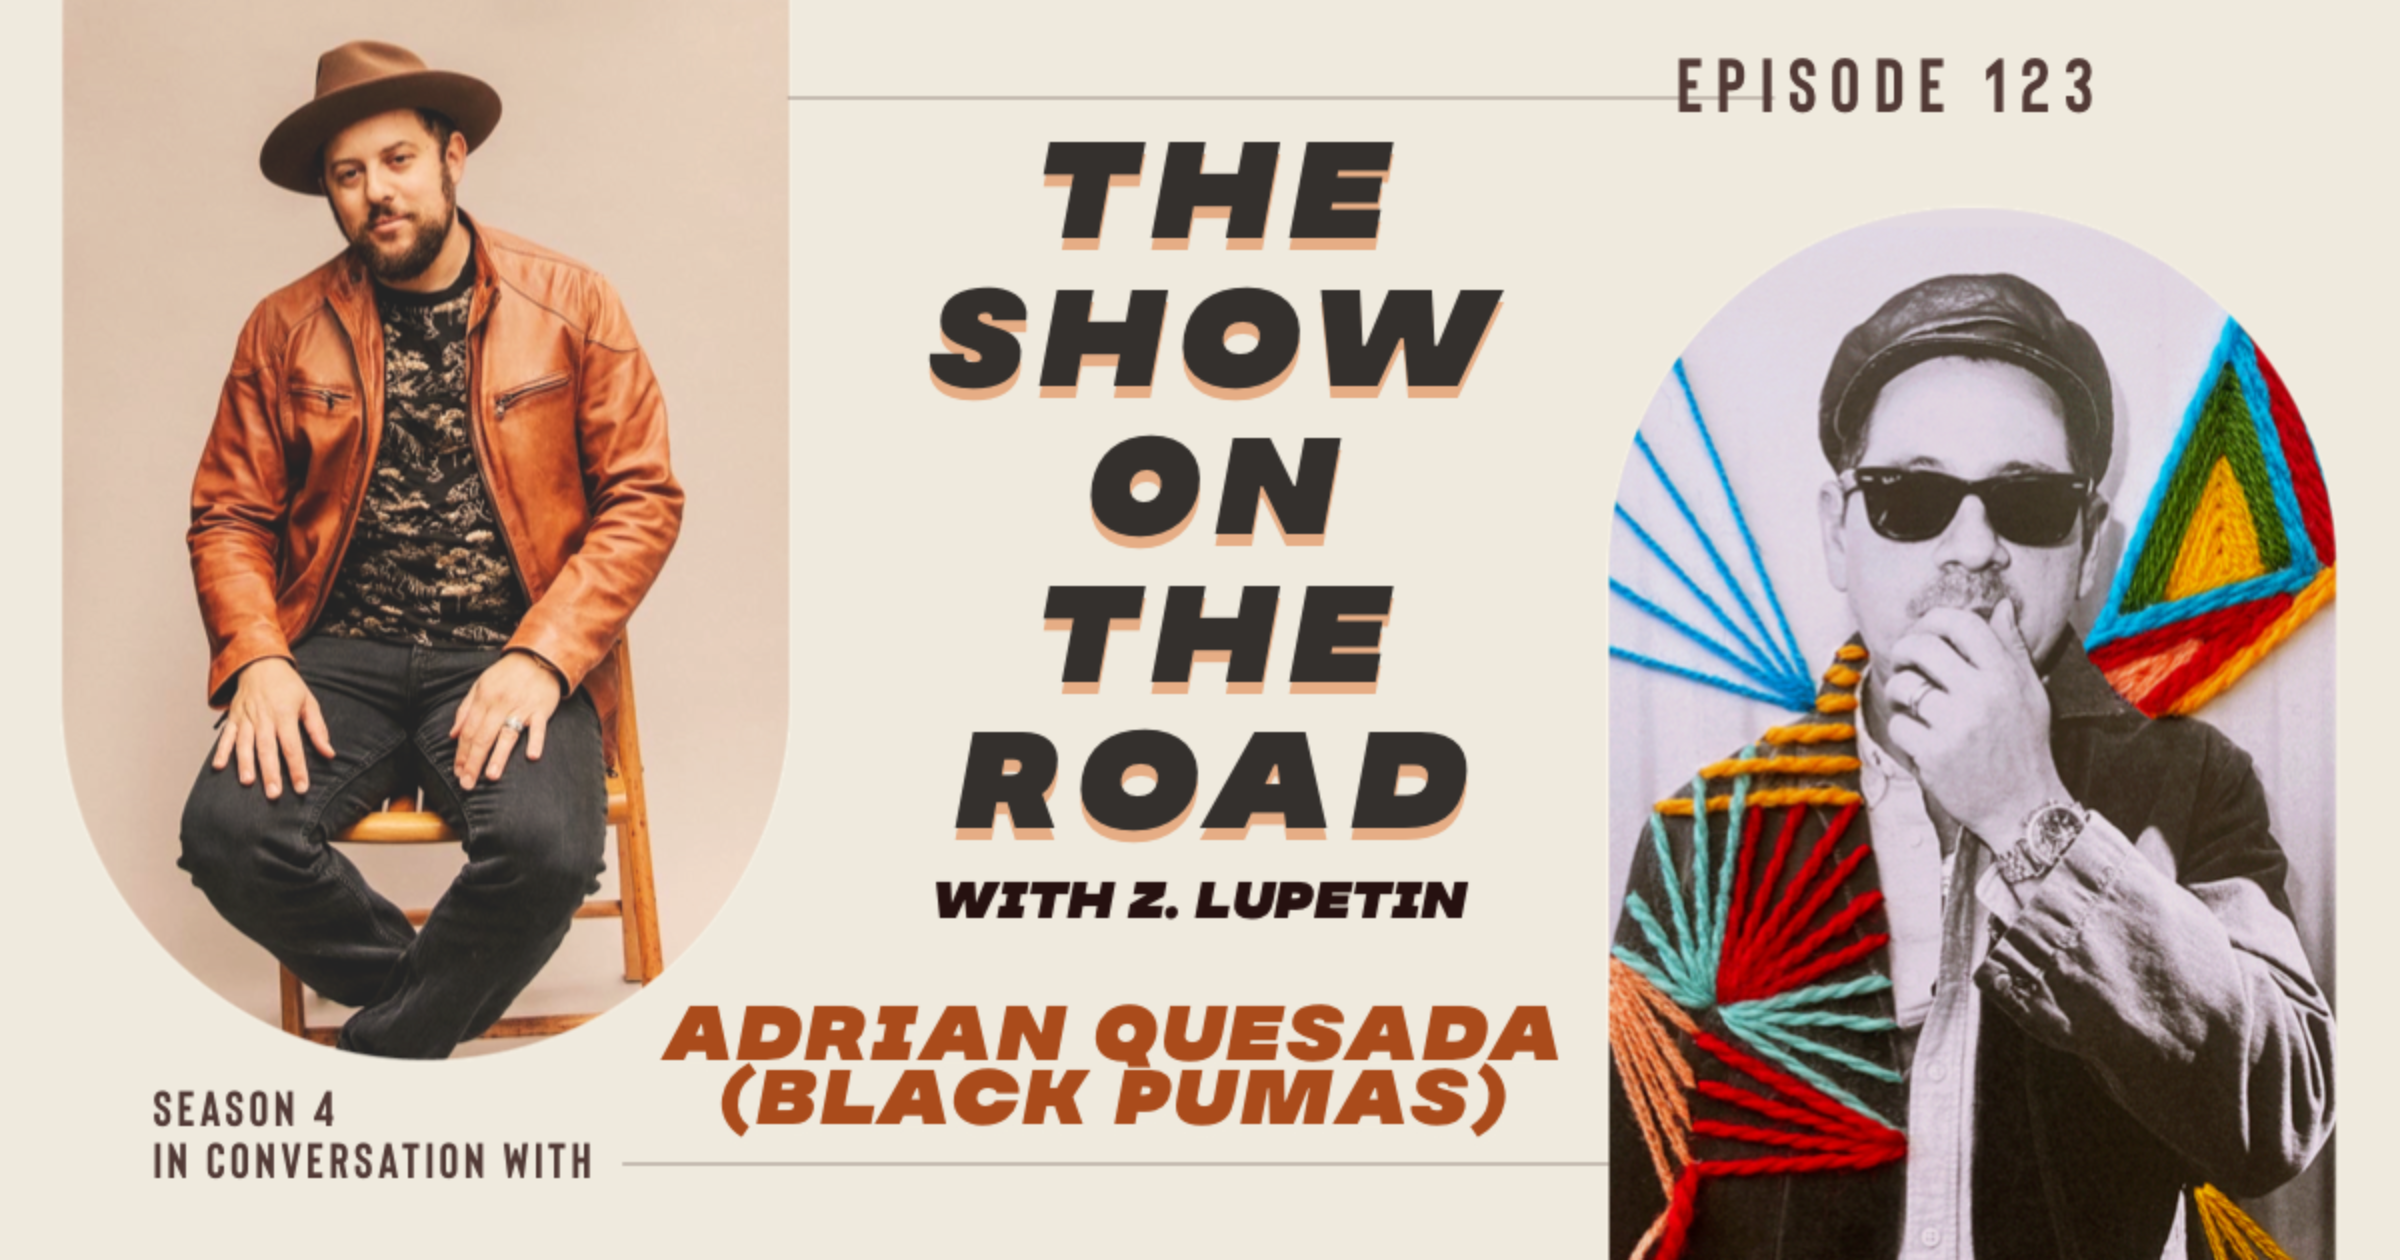 The Show On The Road - Adrian Quesada